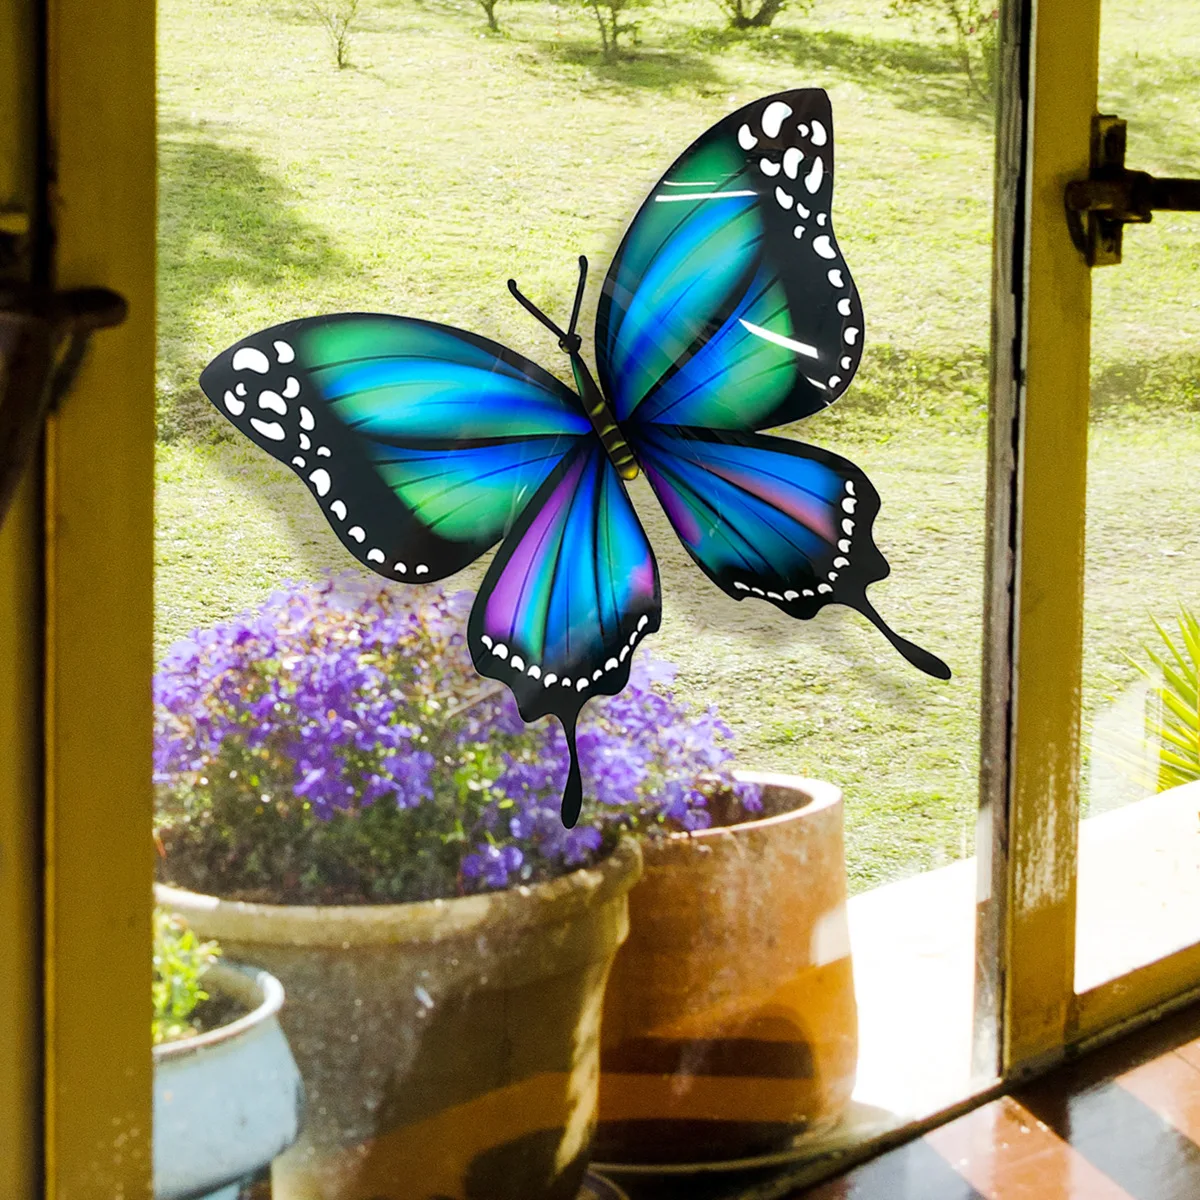 1Pcs 3D large Butterfly Wall Sticker Pasting Simple PVC Harmless Material Balcony Living Room Decorative Wallpaper